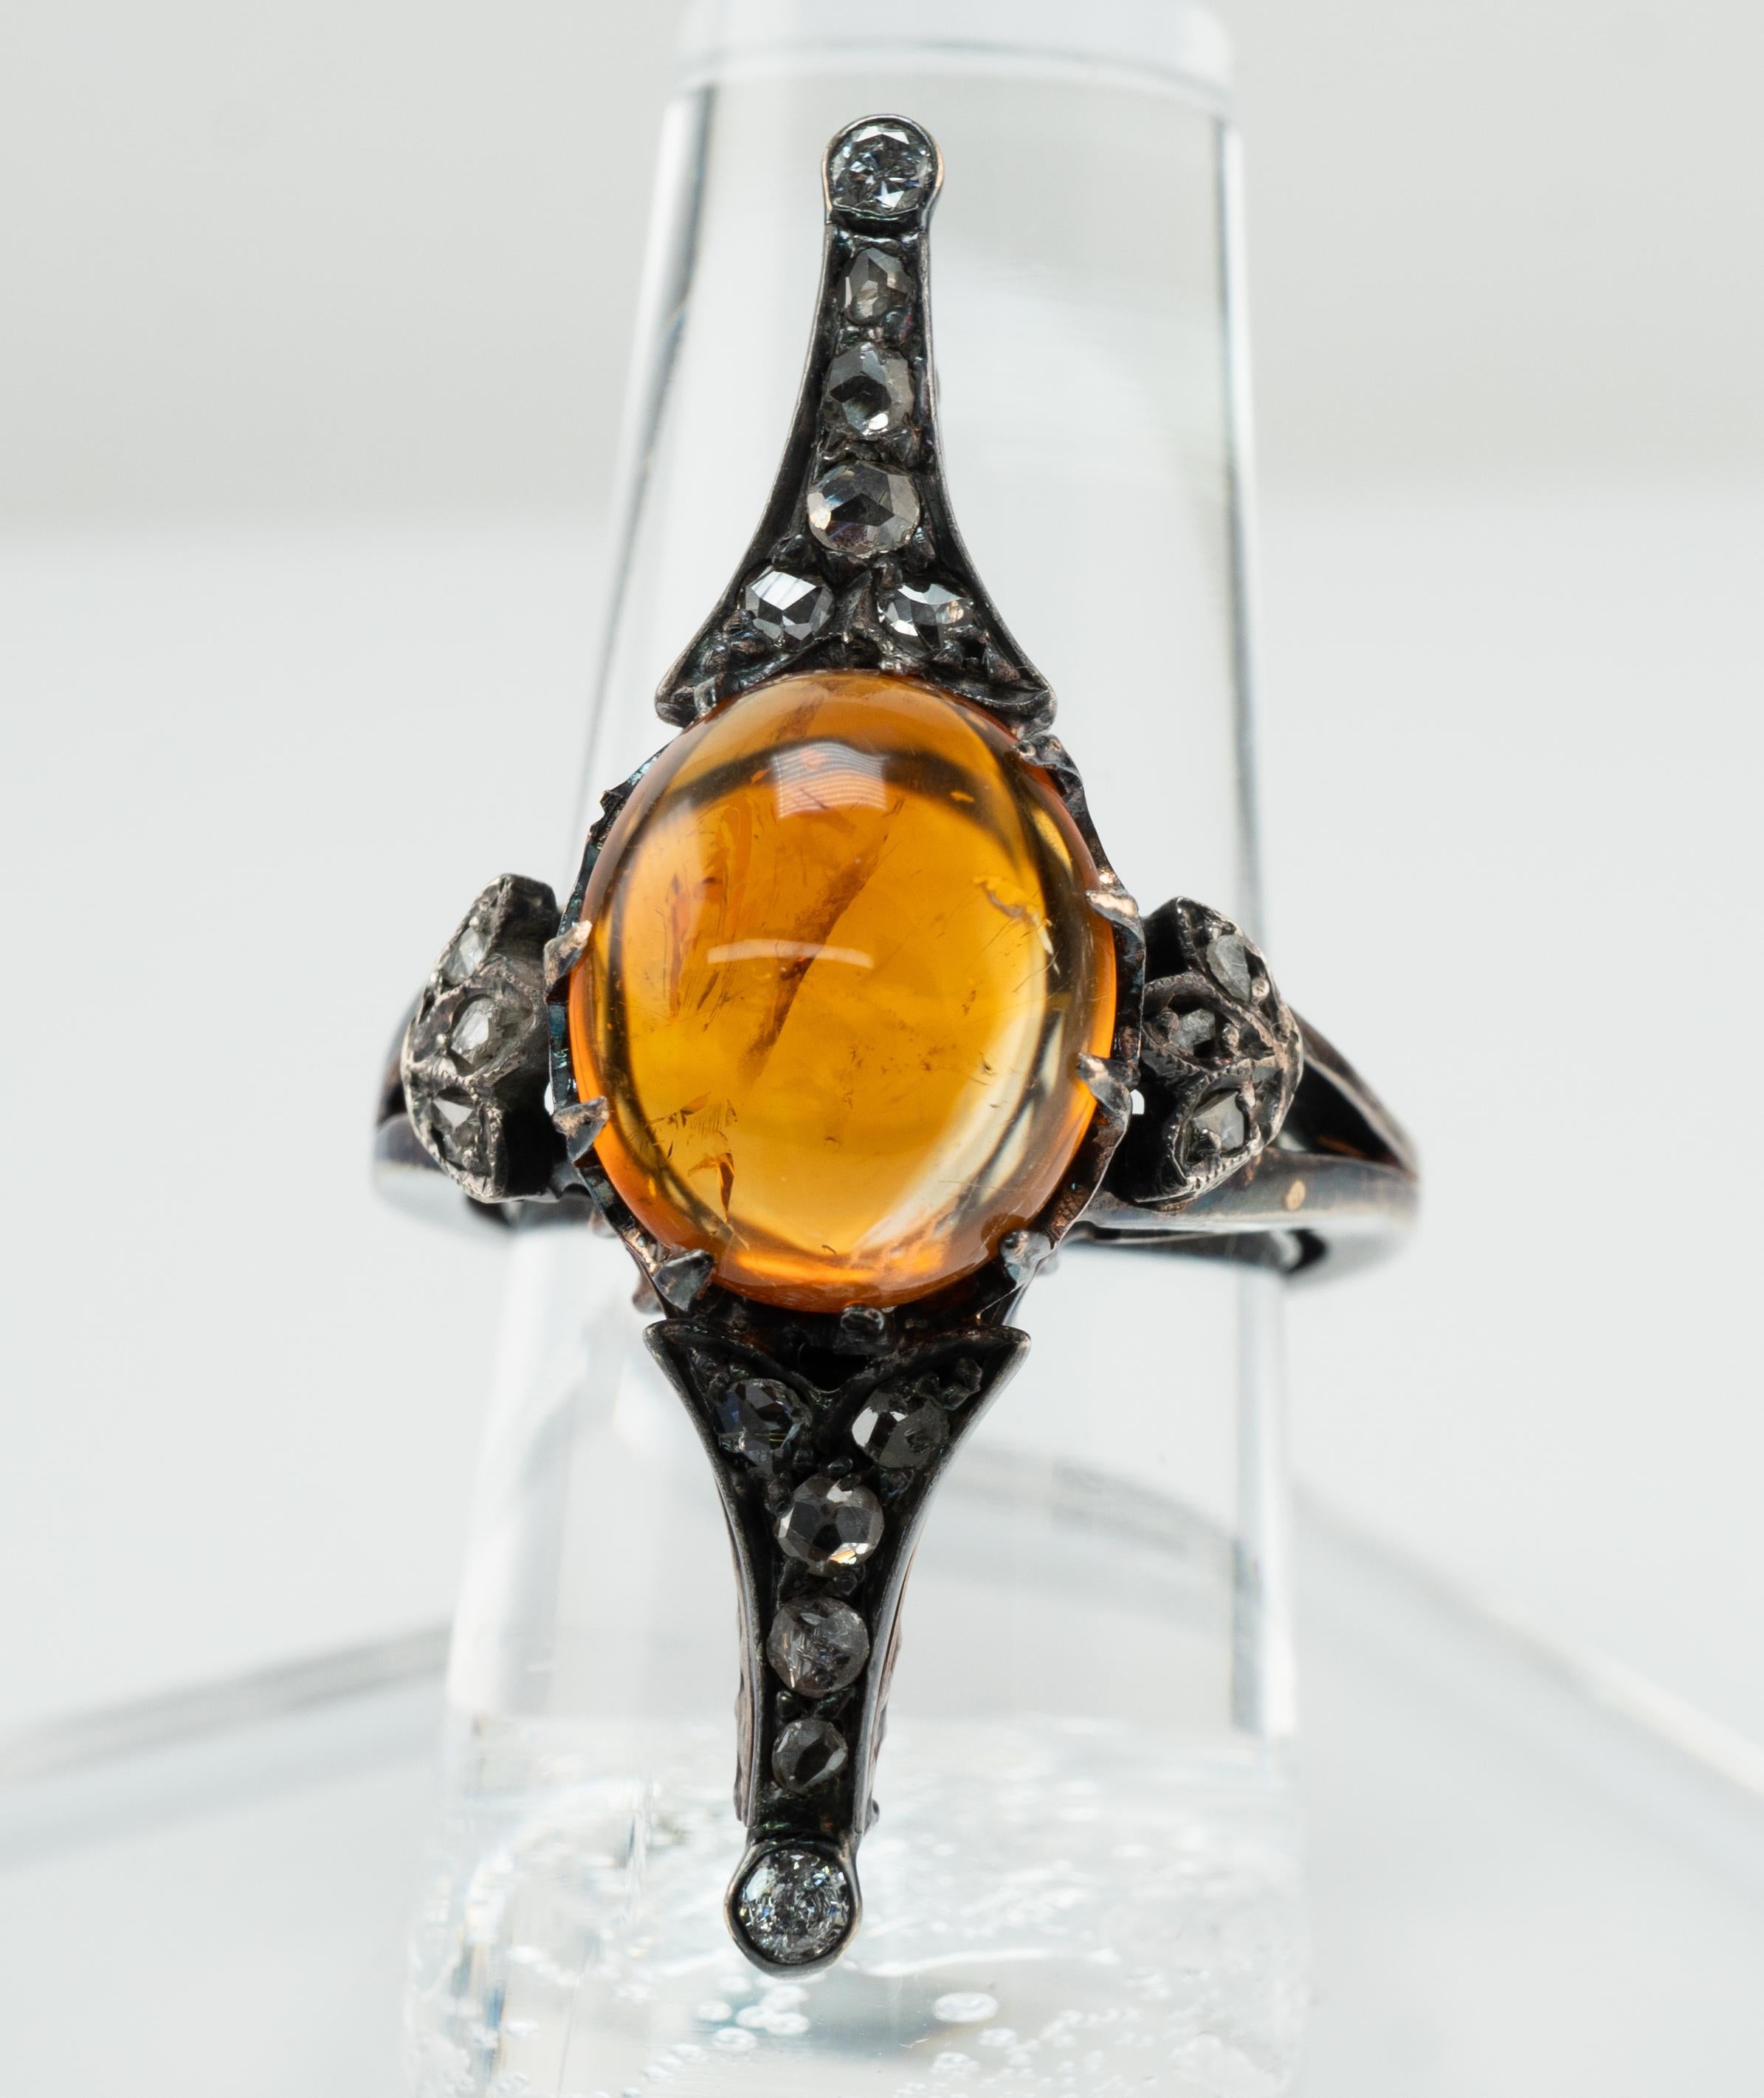 Amber Diamond Ring Elongated 14K White Gold and Sterling Silver Antique

This old antique ring is crafted in solid 14K white blackened gold and Sterling Silver for the top.
The metal was carefully tested with acid and also electronically and